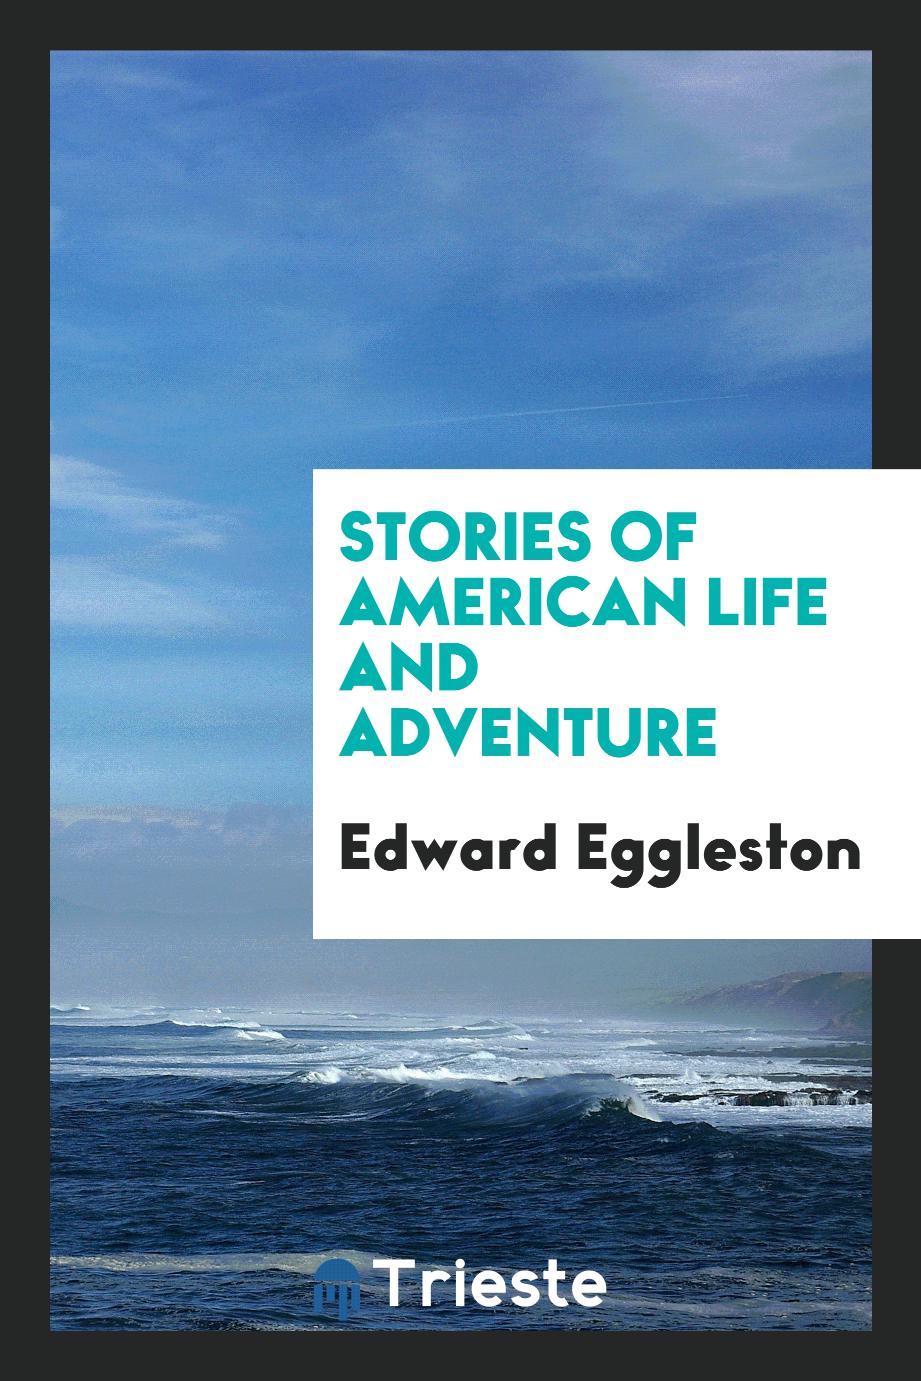 Stories of American life and adventure